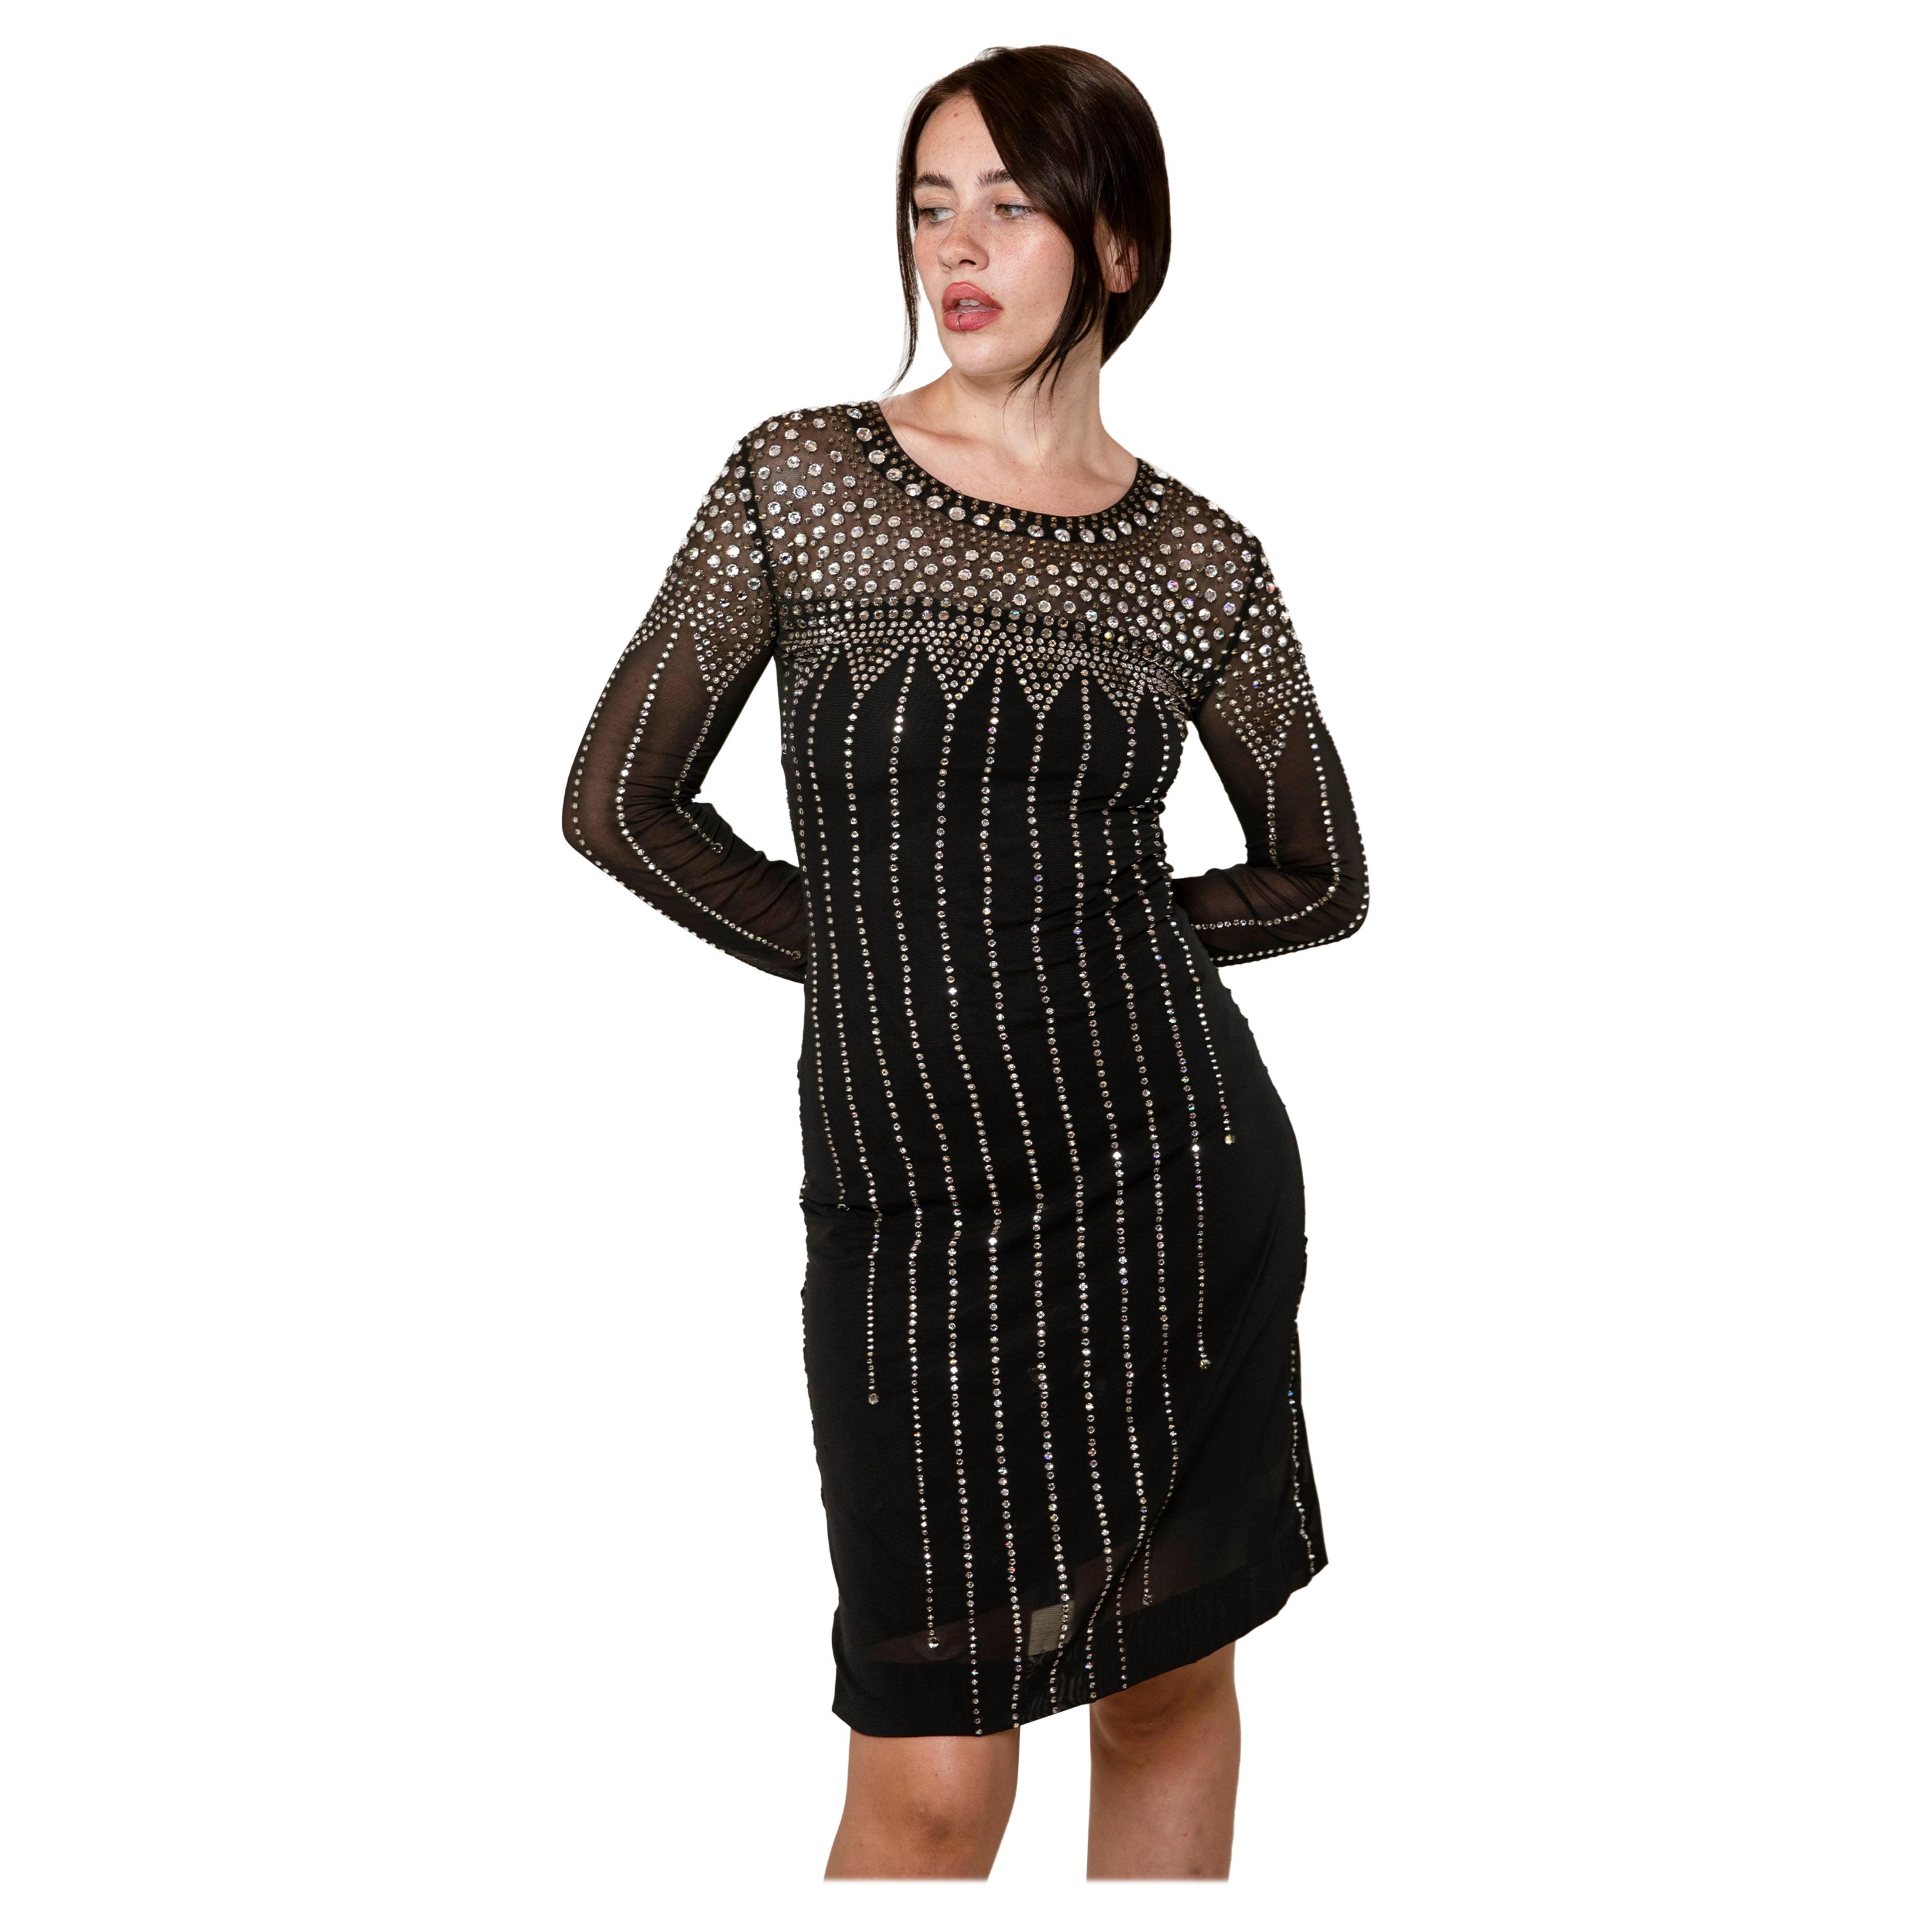 Rhinestone Jersey Cocktail Dress For Sale